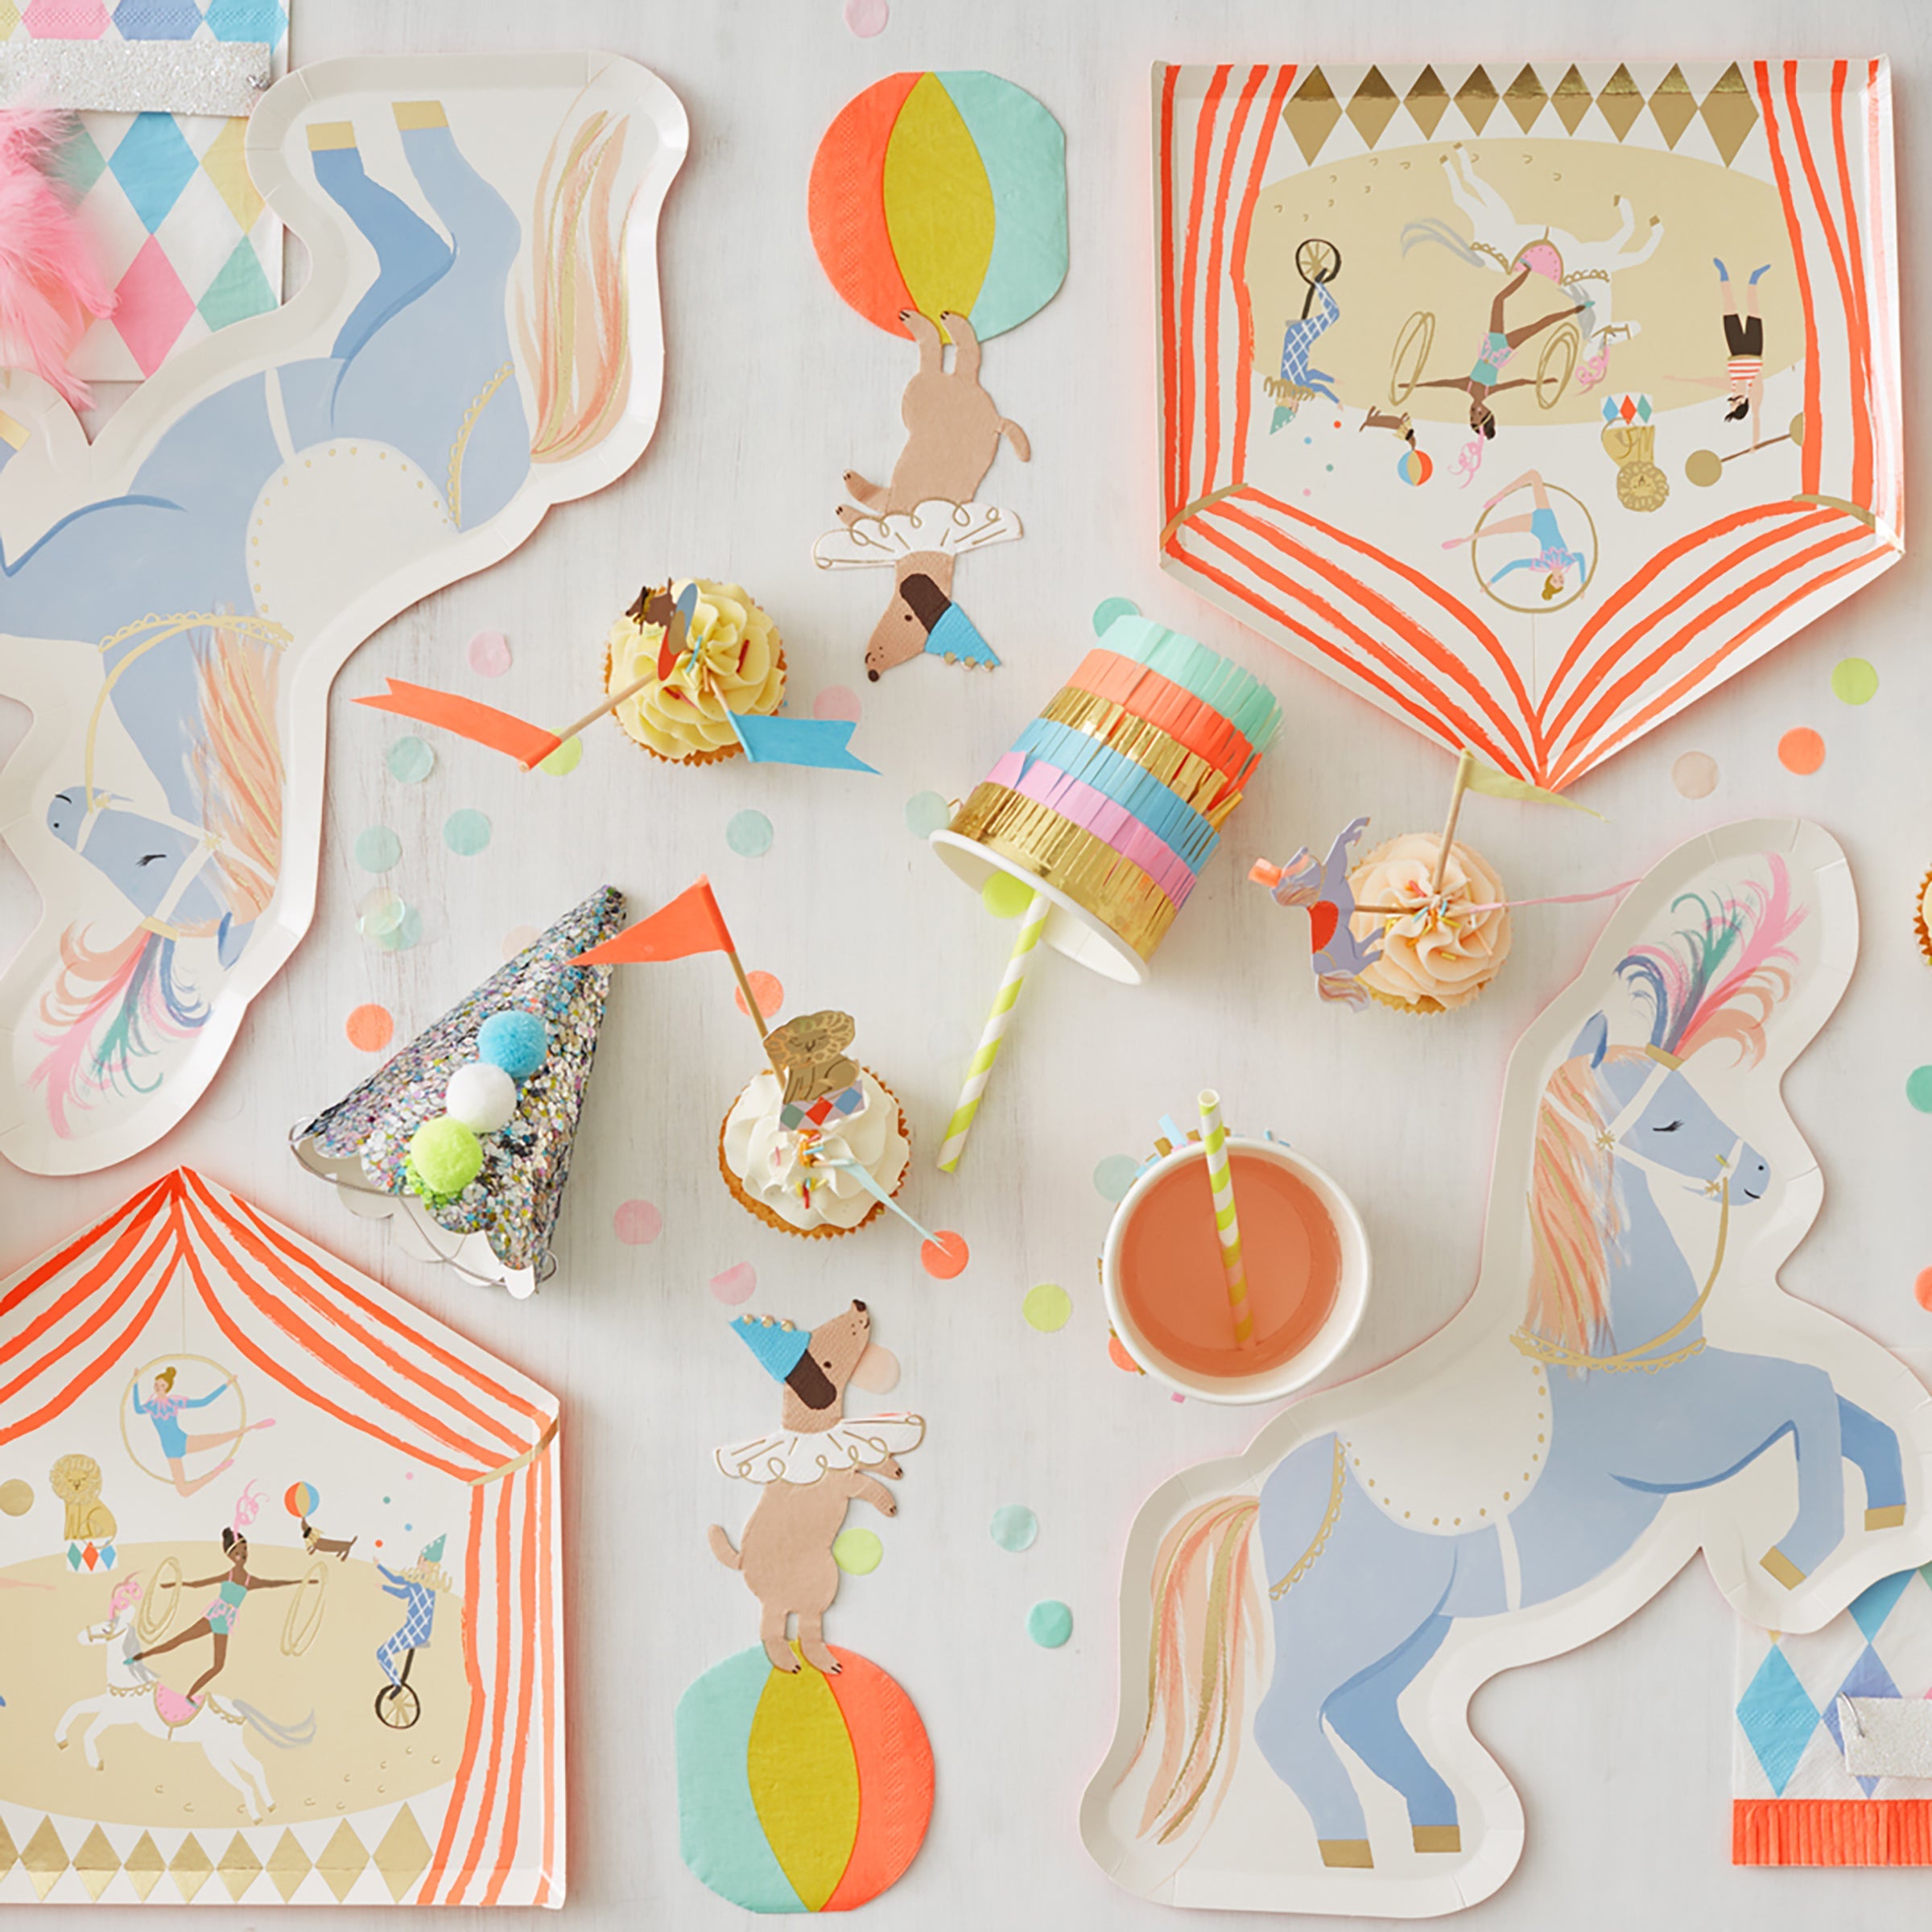 These stunning paper napkins, in the shape of a circus dog balancing on a striped ball, are perfect for a circus party.